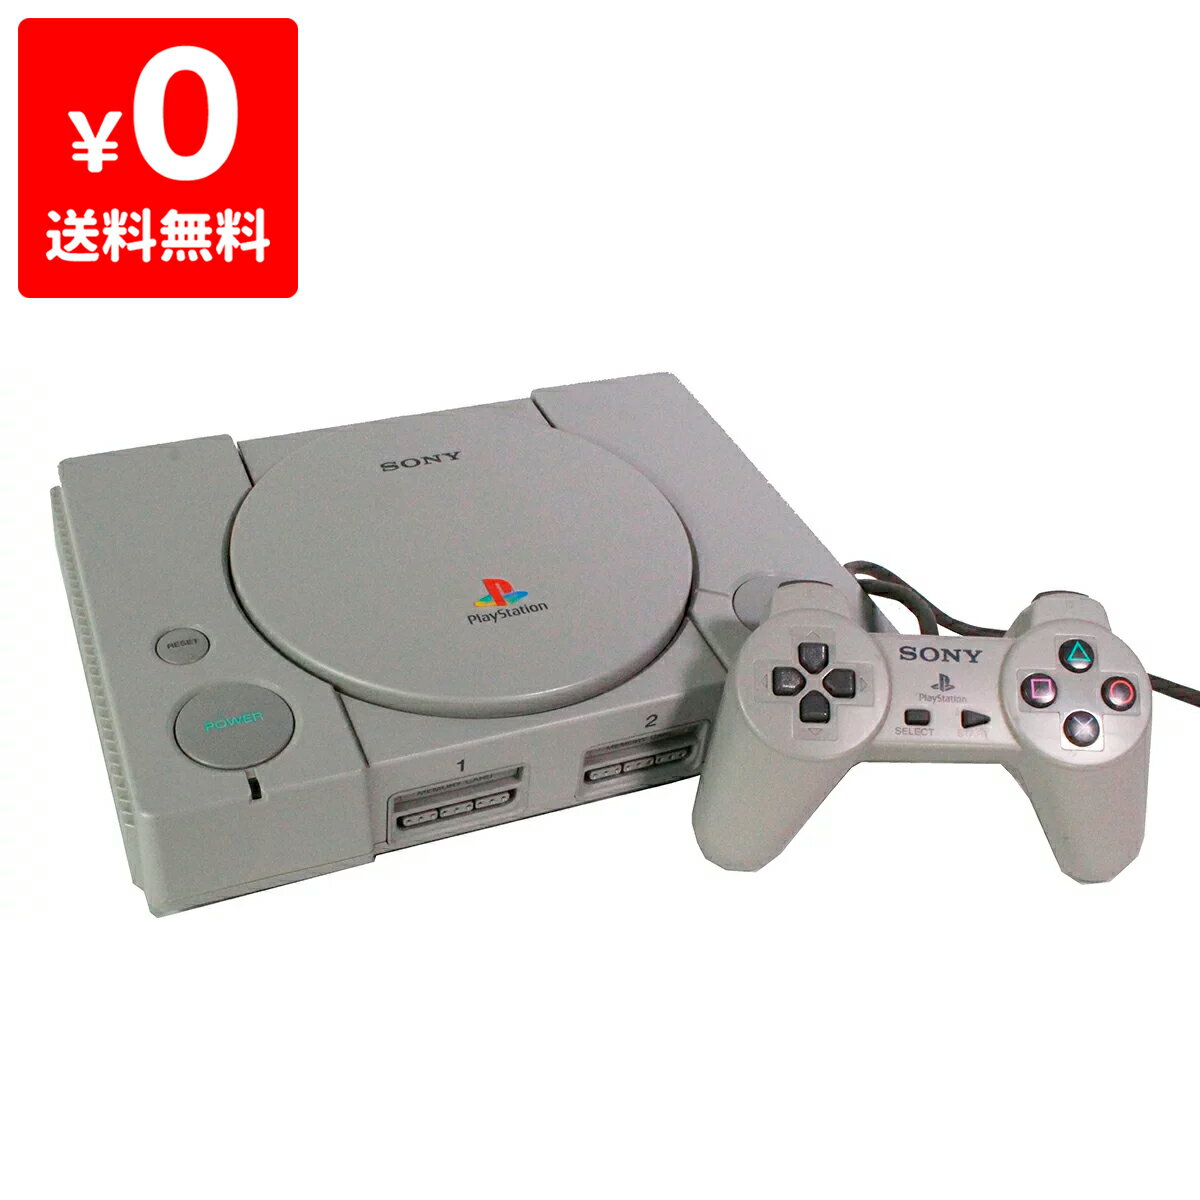 PS 5000 SCPH-5000 本体 すぐ遊べるセット PlayStation SONY ソニー ...